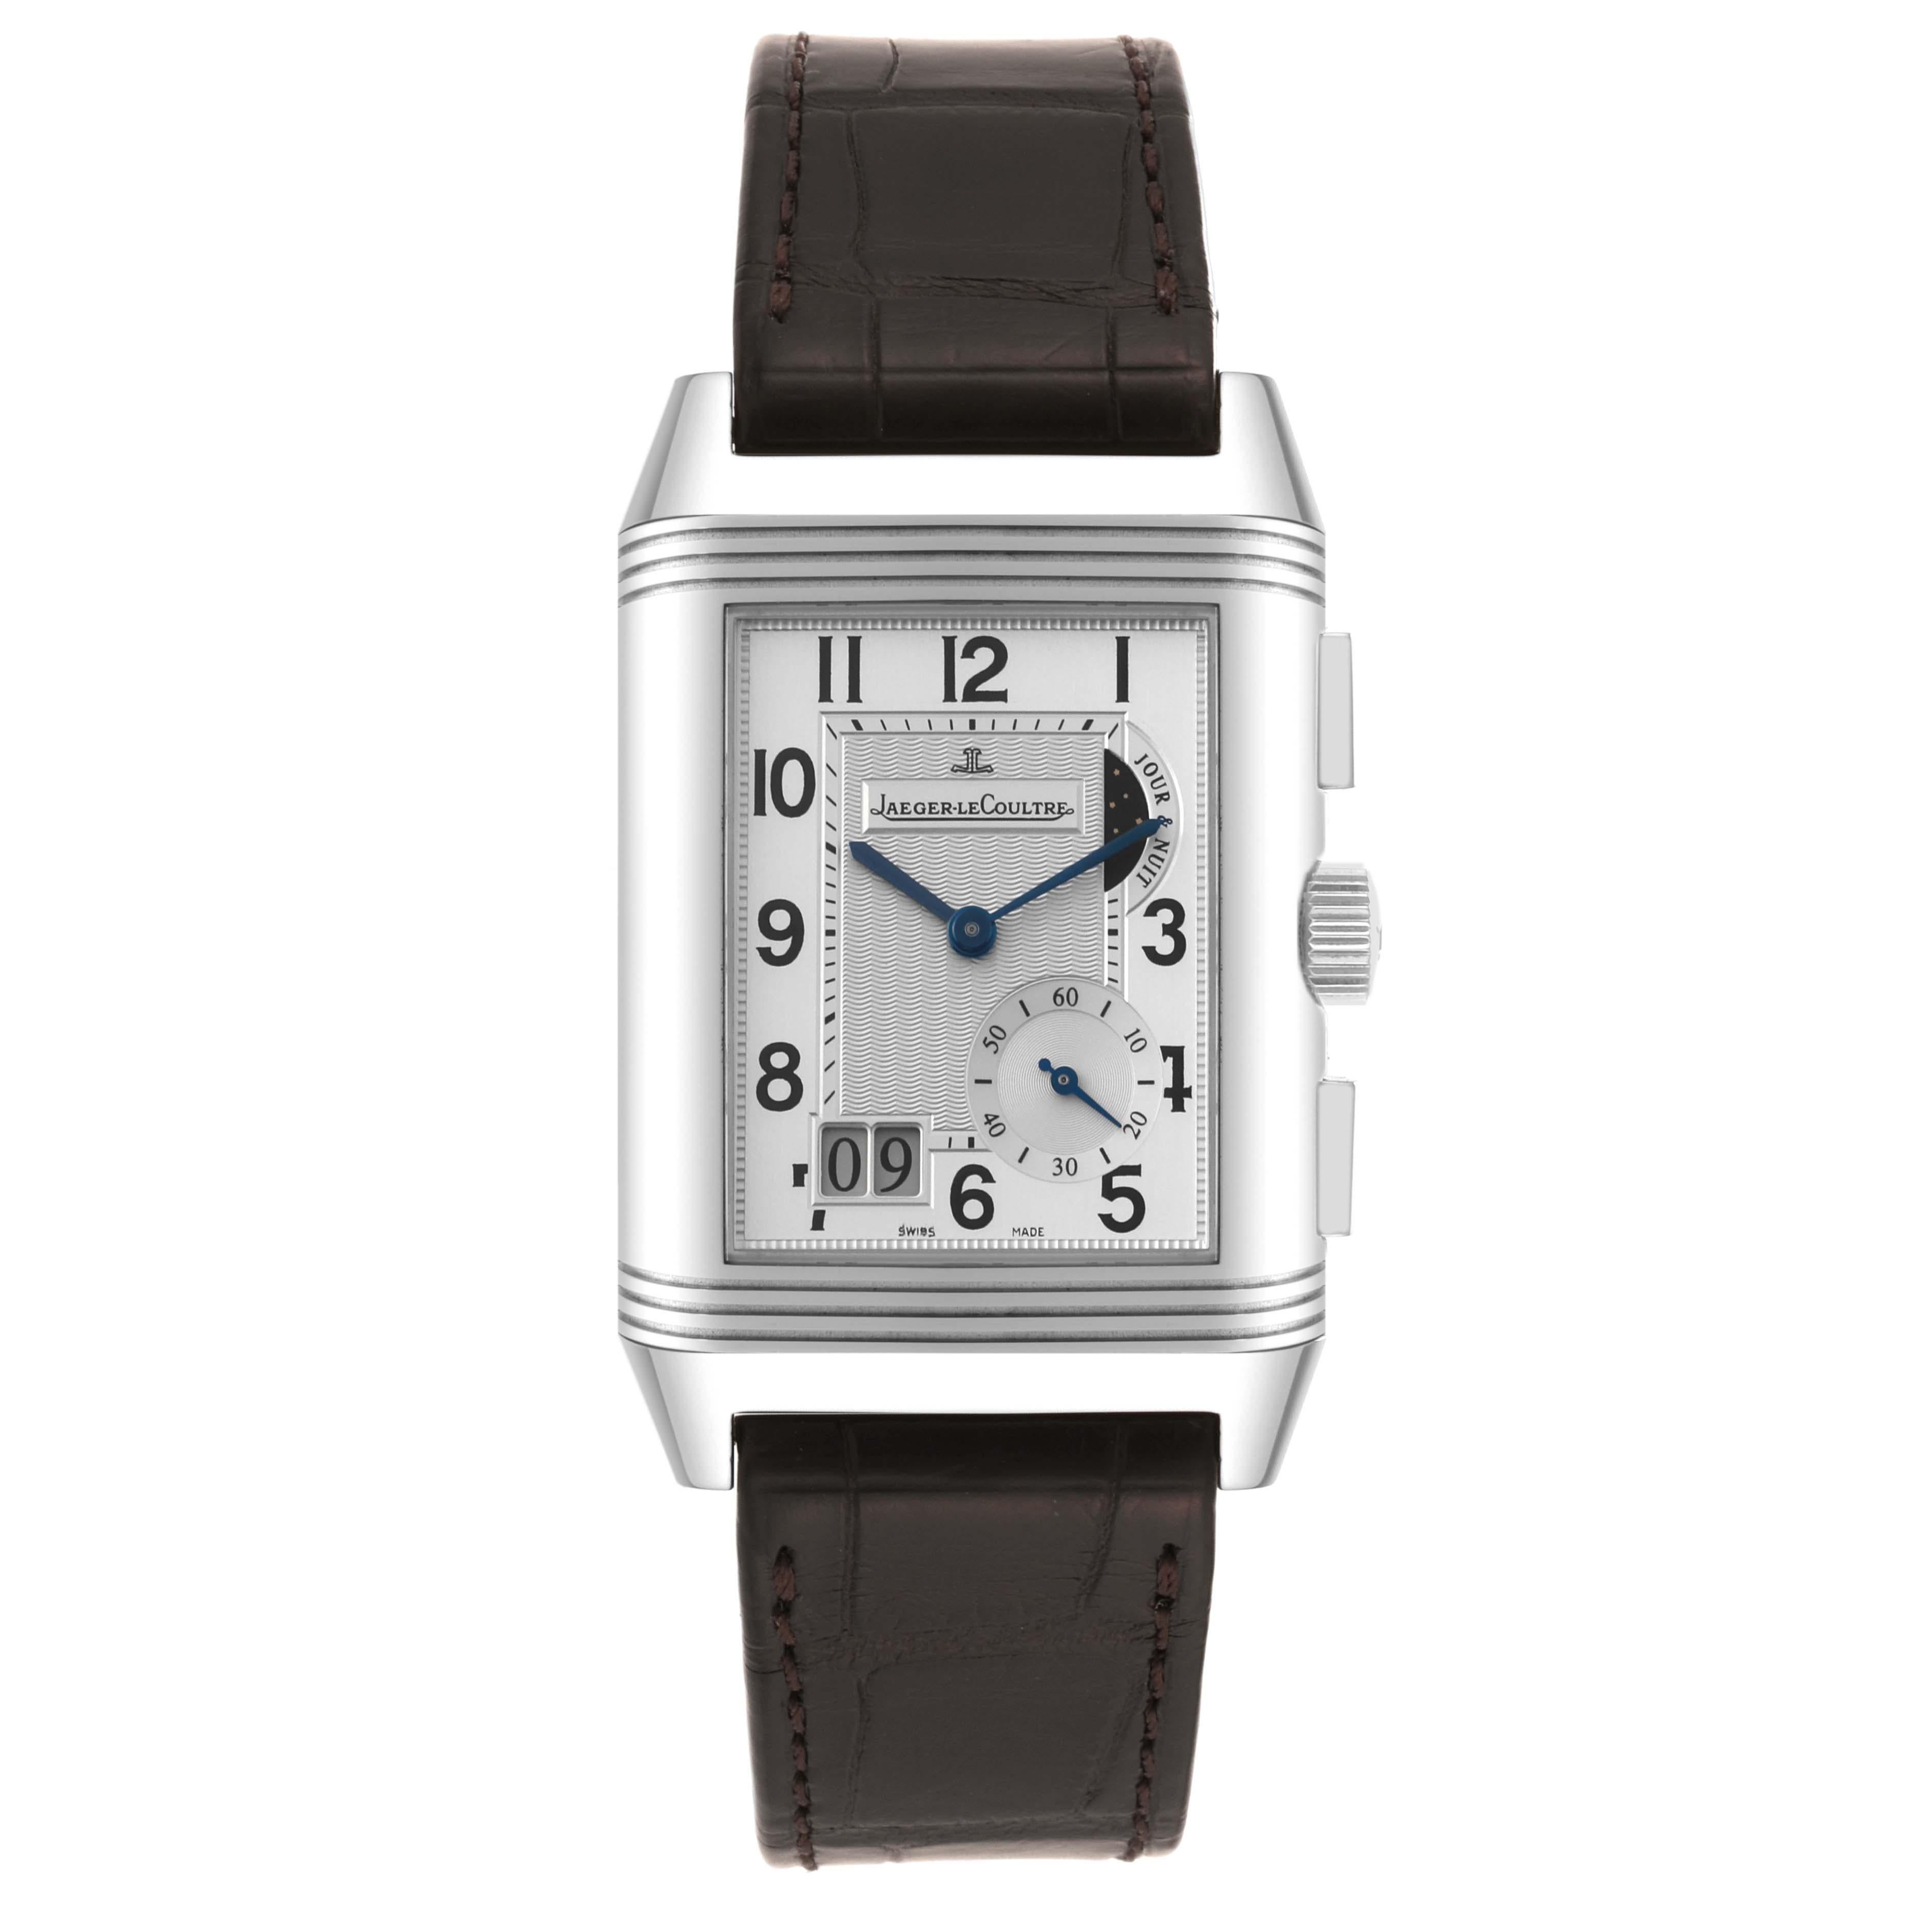 Jaeger LeCoultre Reverso Grande GMT Steel Watch 240.8.18 Q3028420 Box Papers In Excellent Condition For Sale In Atlanta, GA